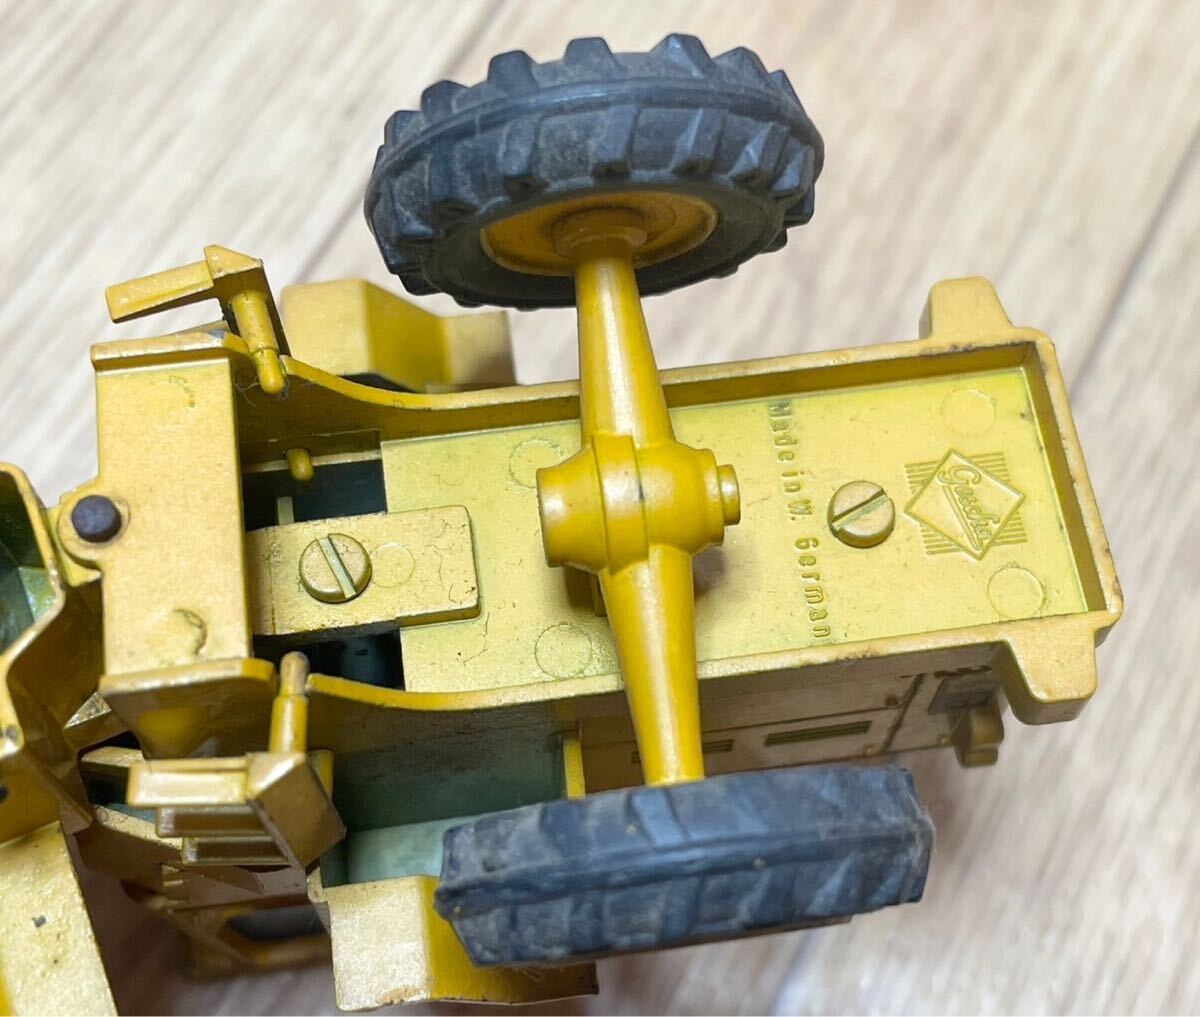  rare! that time thing gescha metallic model Germany west Germany made construction vehicle work car crane car dump minicar treasure large amount together 4 point C12